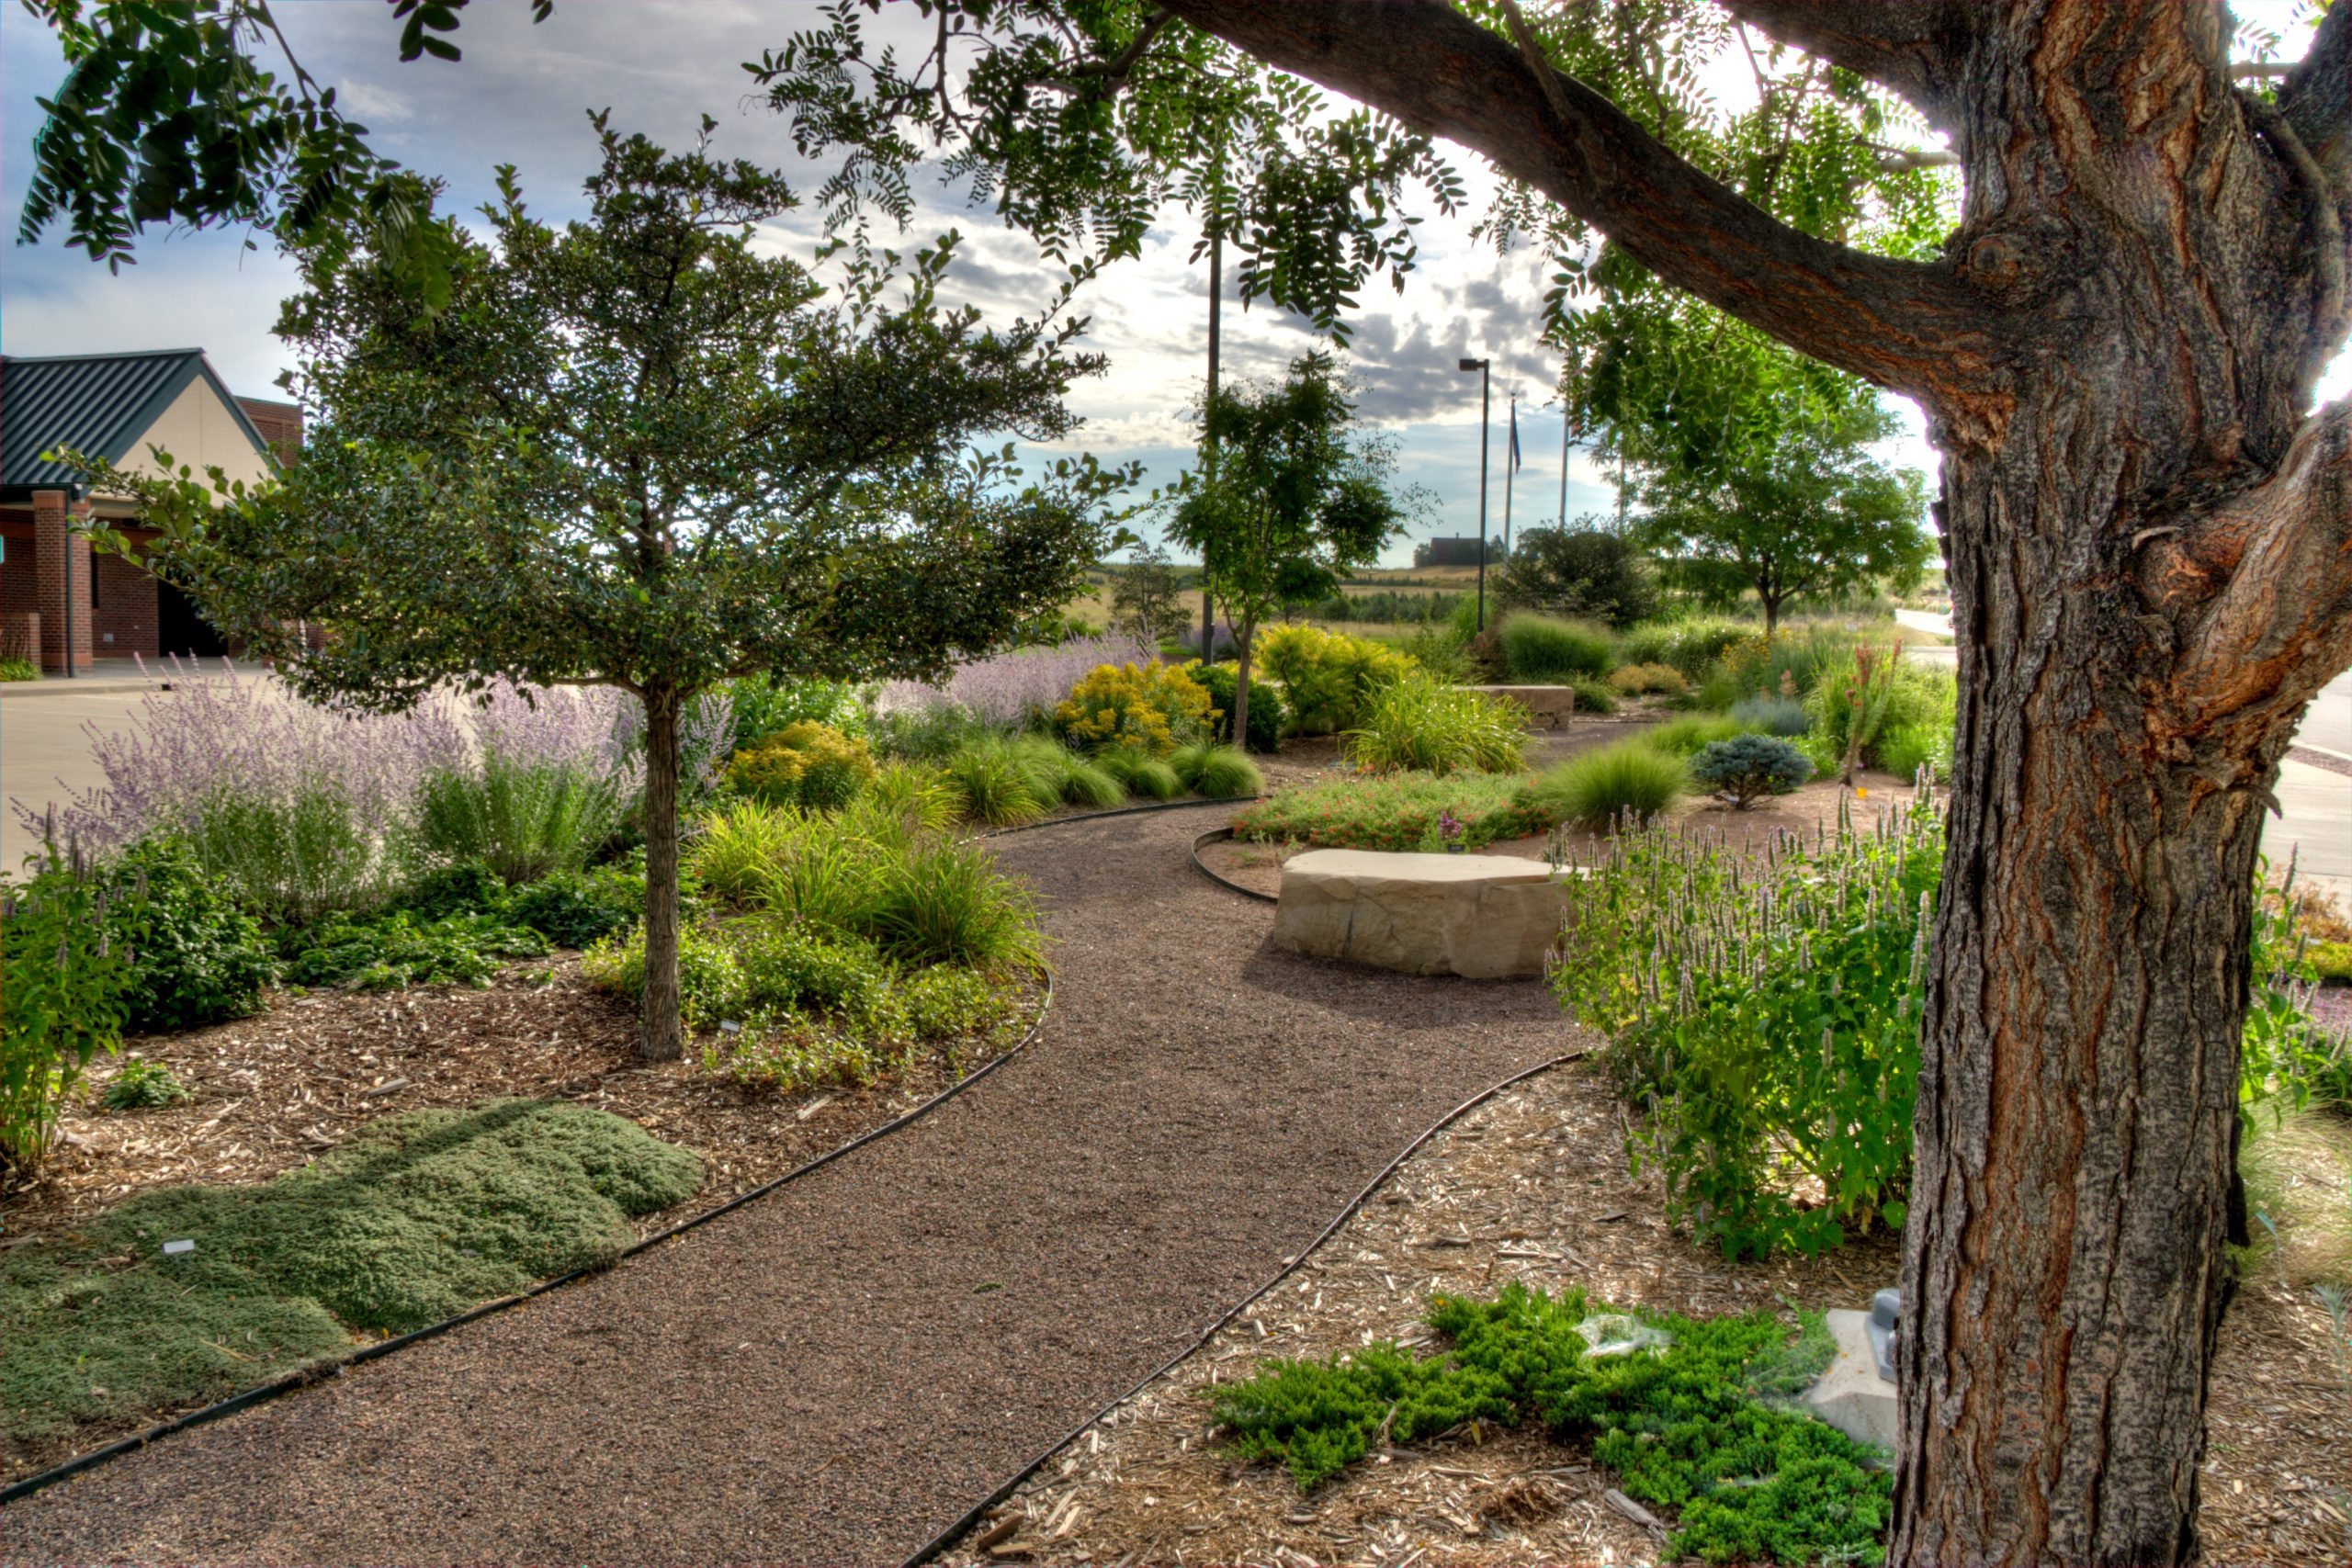 A gravel path shows the walk-through demonstration garden at Fire Station 5 with green trees and shrubs and the fire station building in the background.